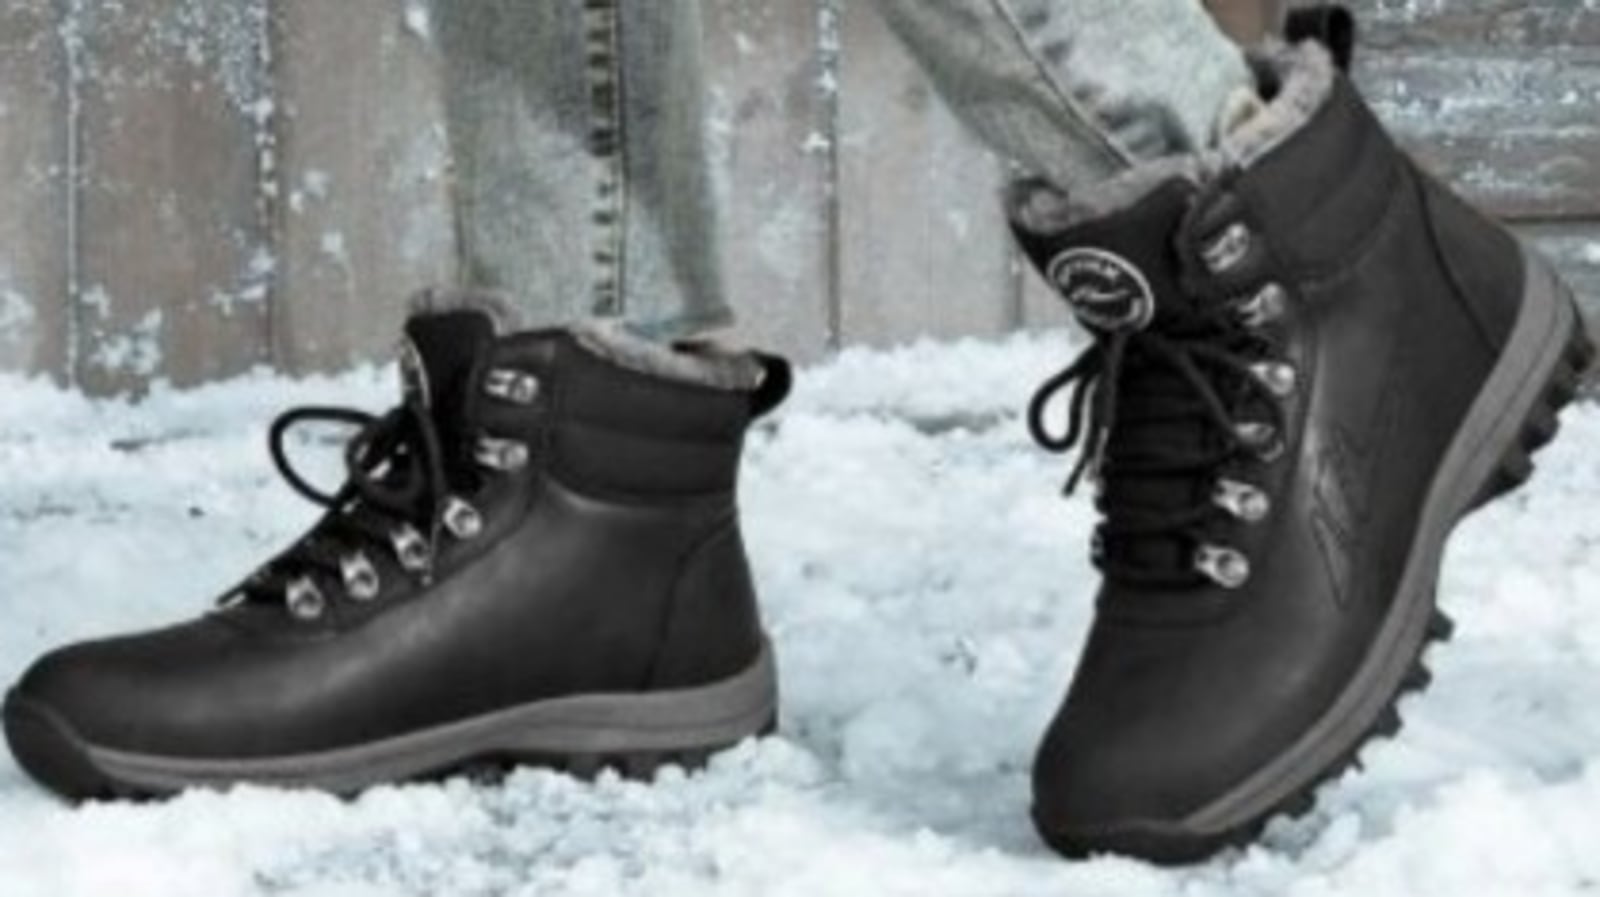 Winter boots for men give protection in bad weather, make walking on snow  easy